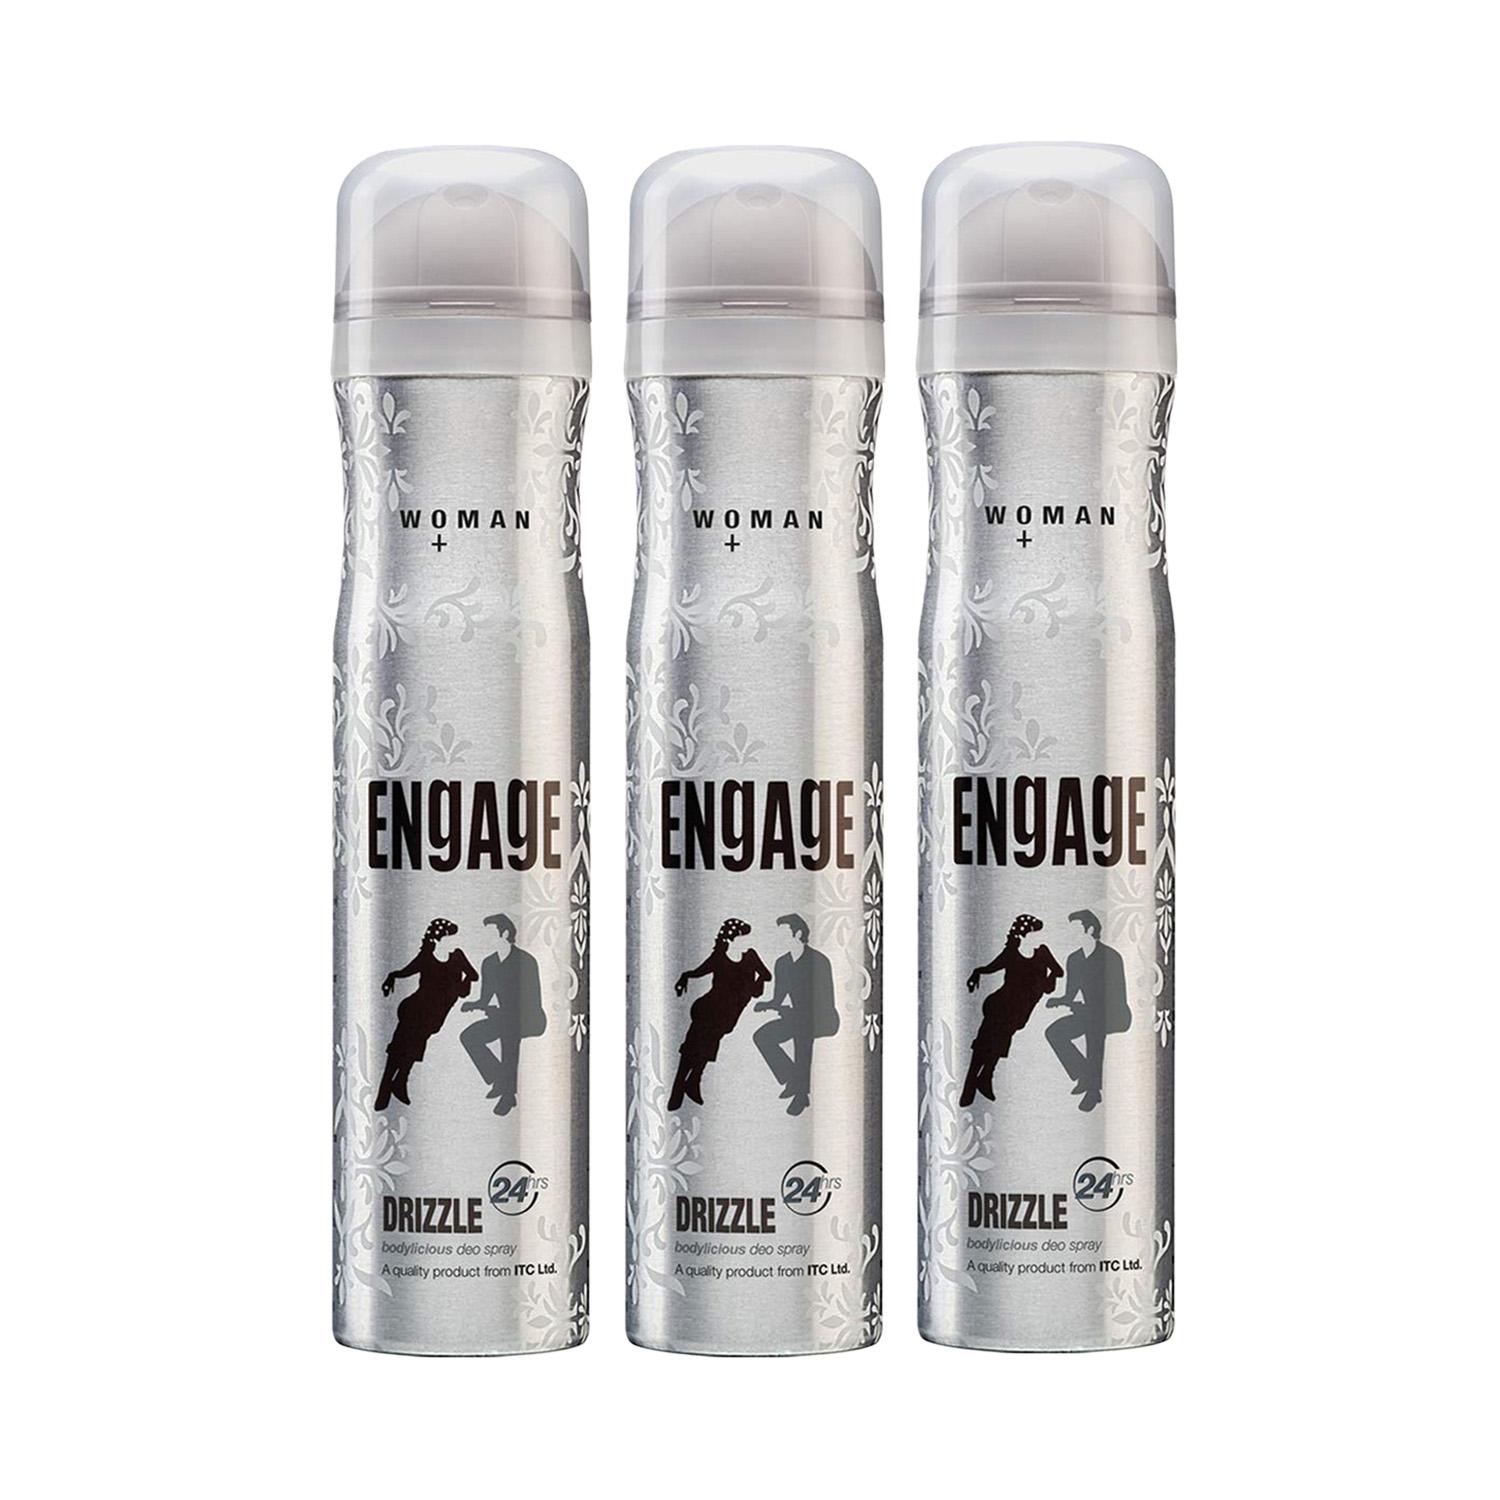 Engage | Engage Drizzle Deodorant Spray For Women (Pack of 3) Combo